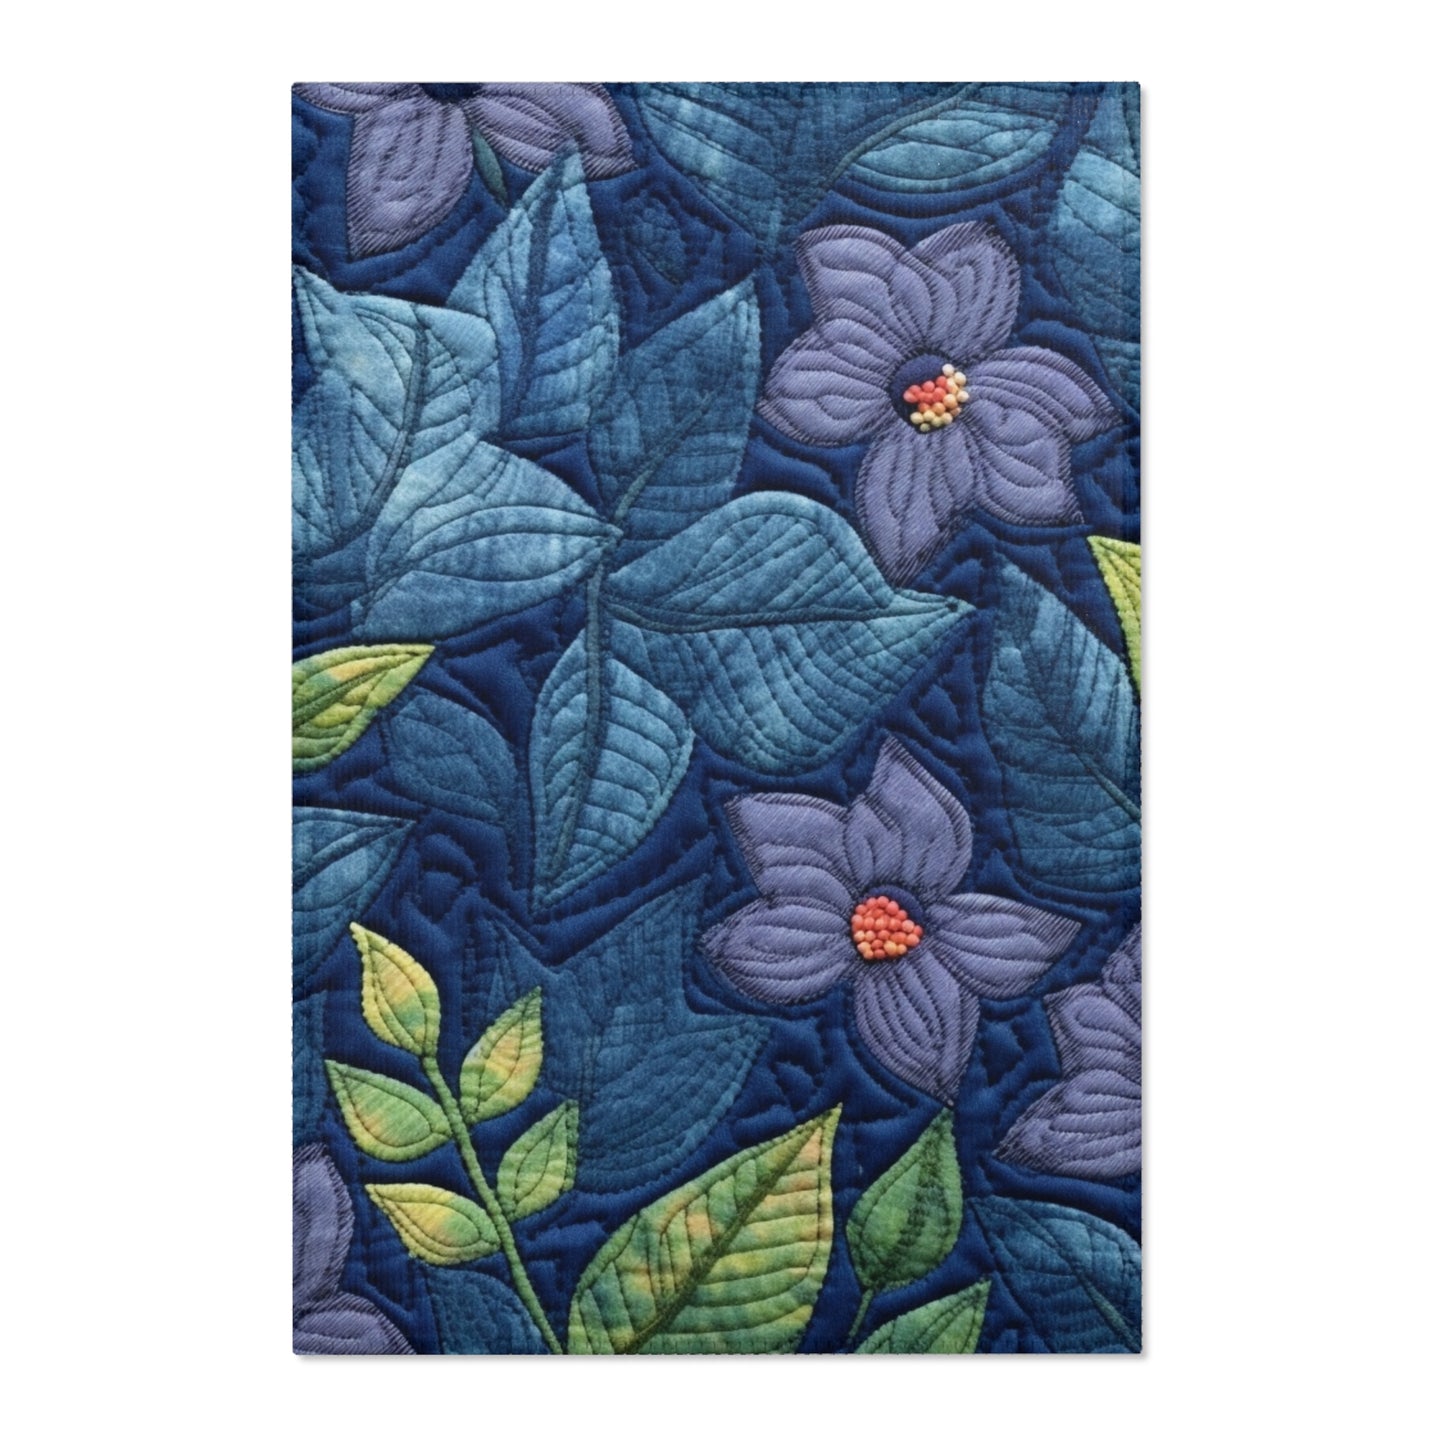 Floral Embroidery Blue: Denim-Inspired, Artisan-Crafted Flower Design - Area Rugs